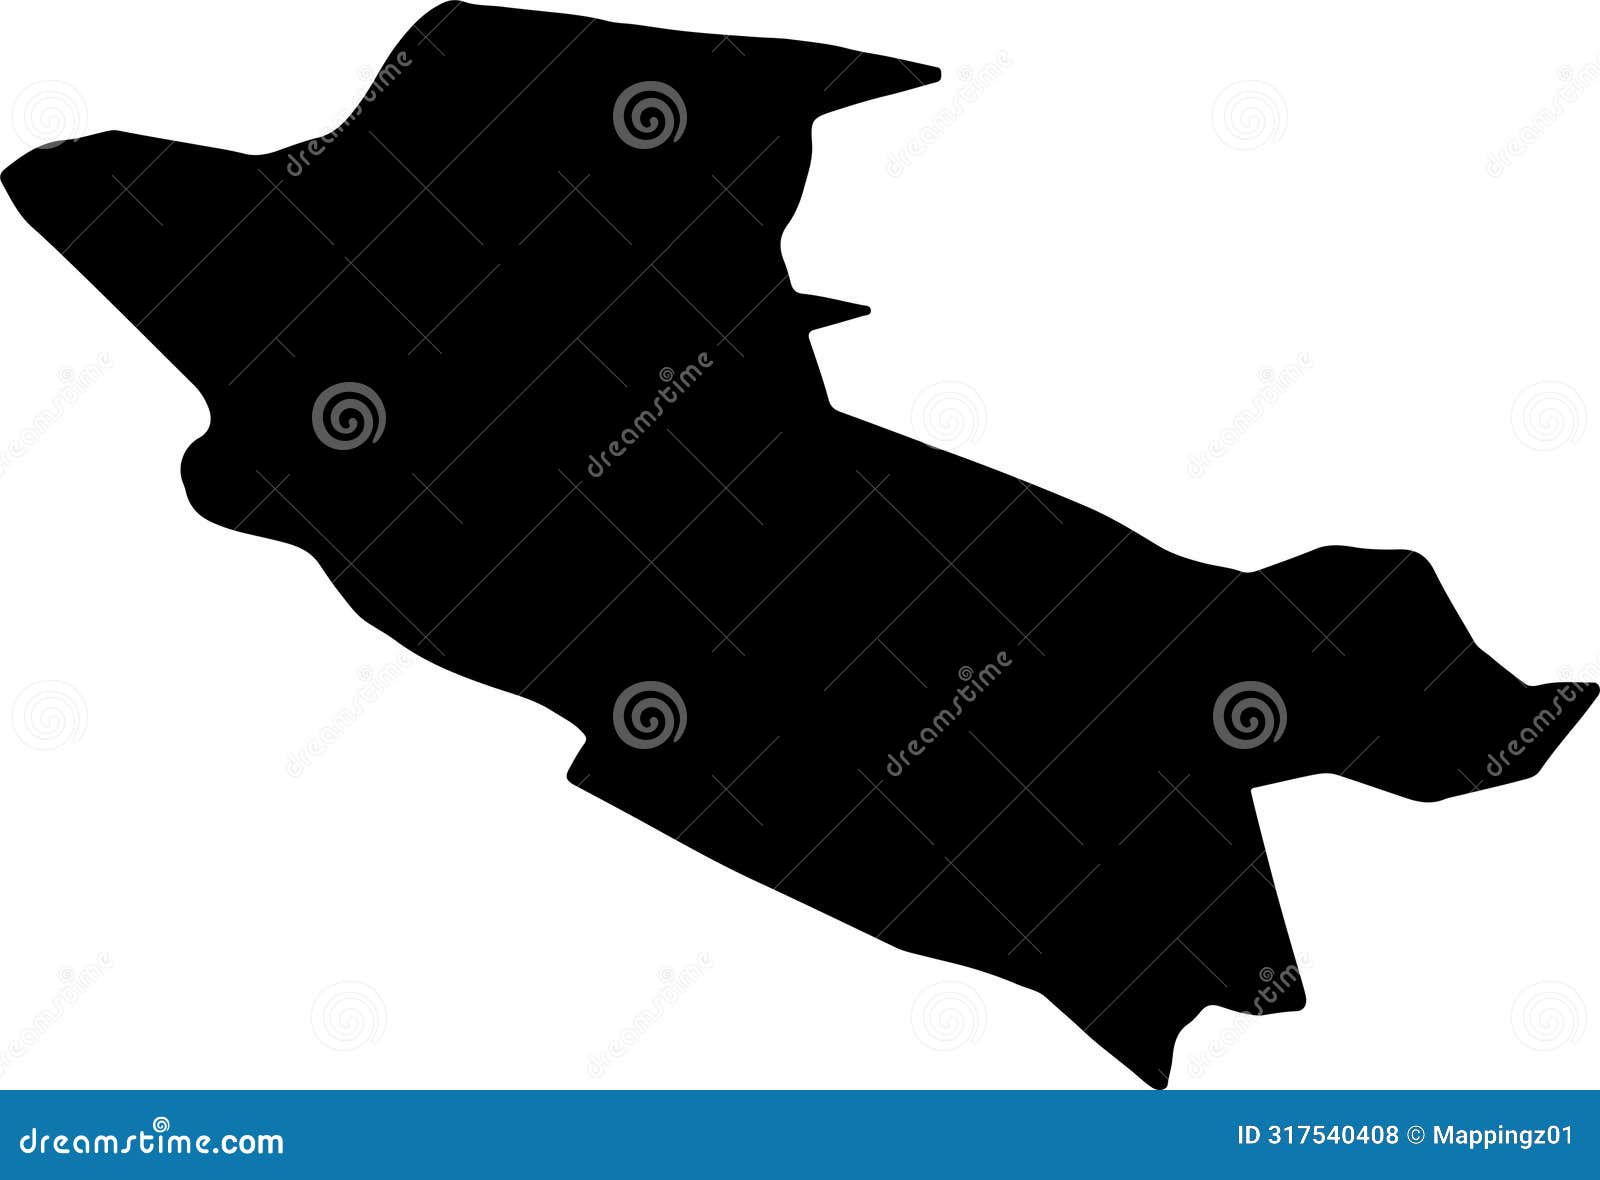 independencia dominican republic silhouette map with transparent background